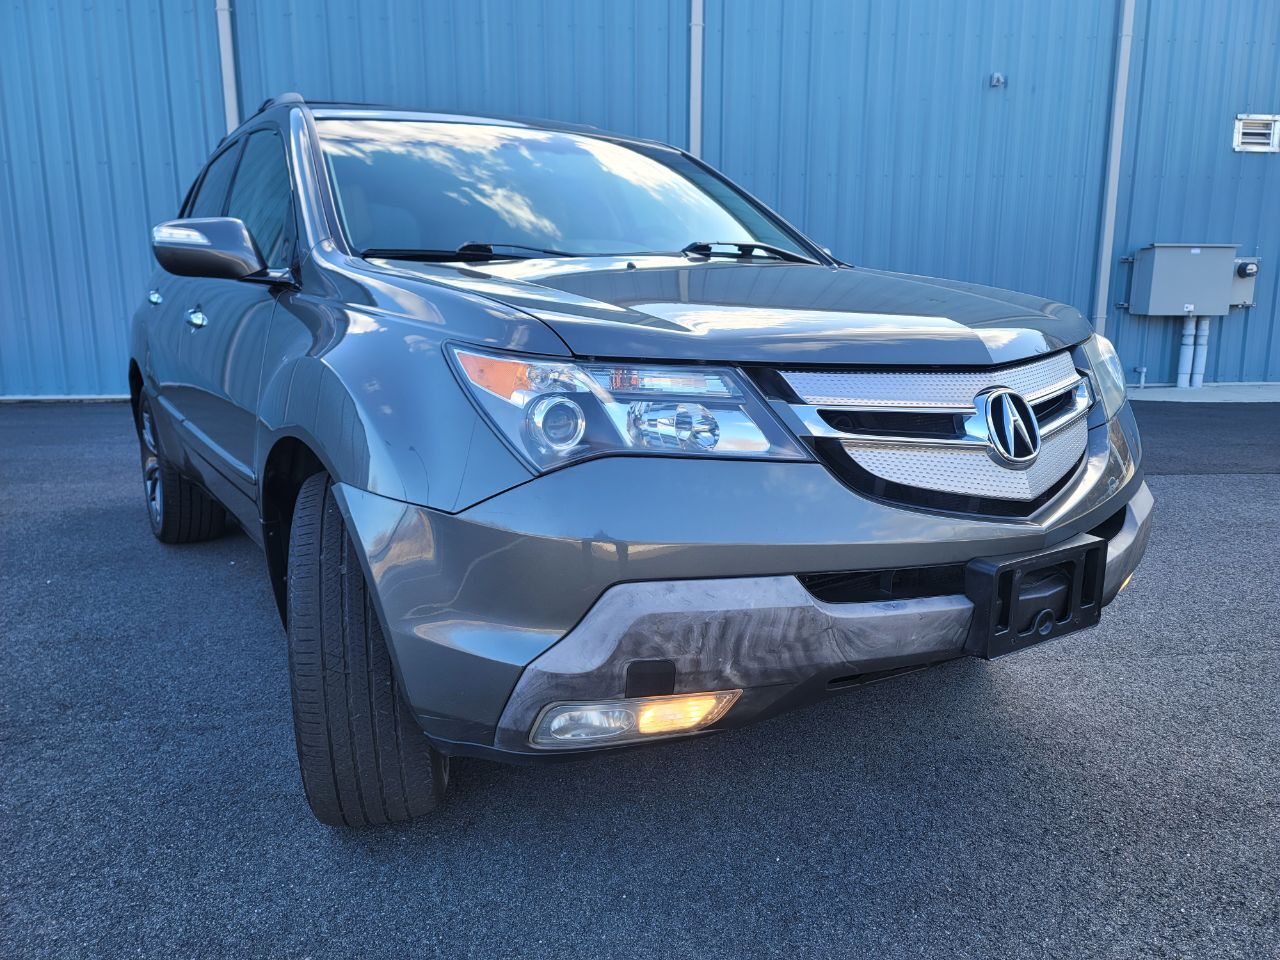 2008 Acura MDX For Sale - Carsforsale.com®